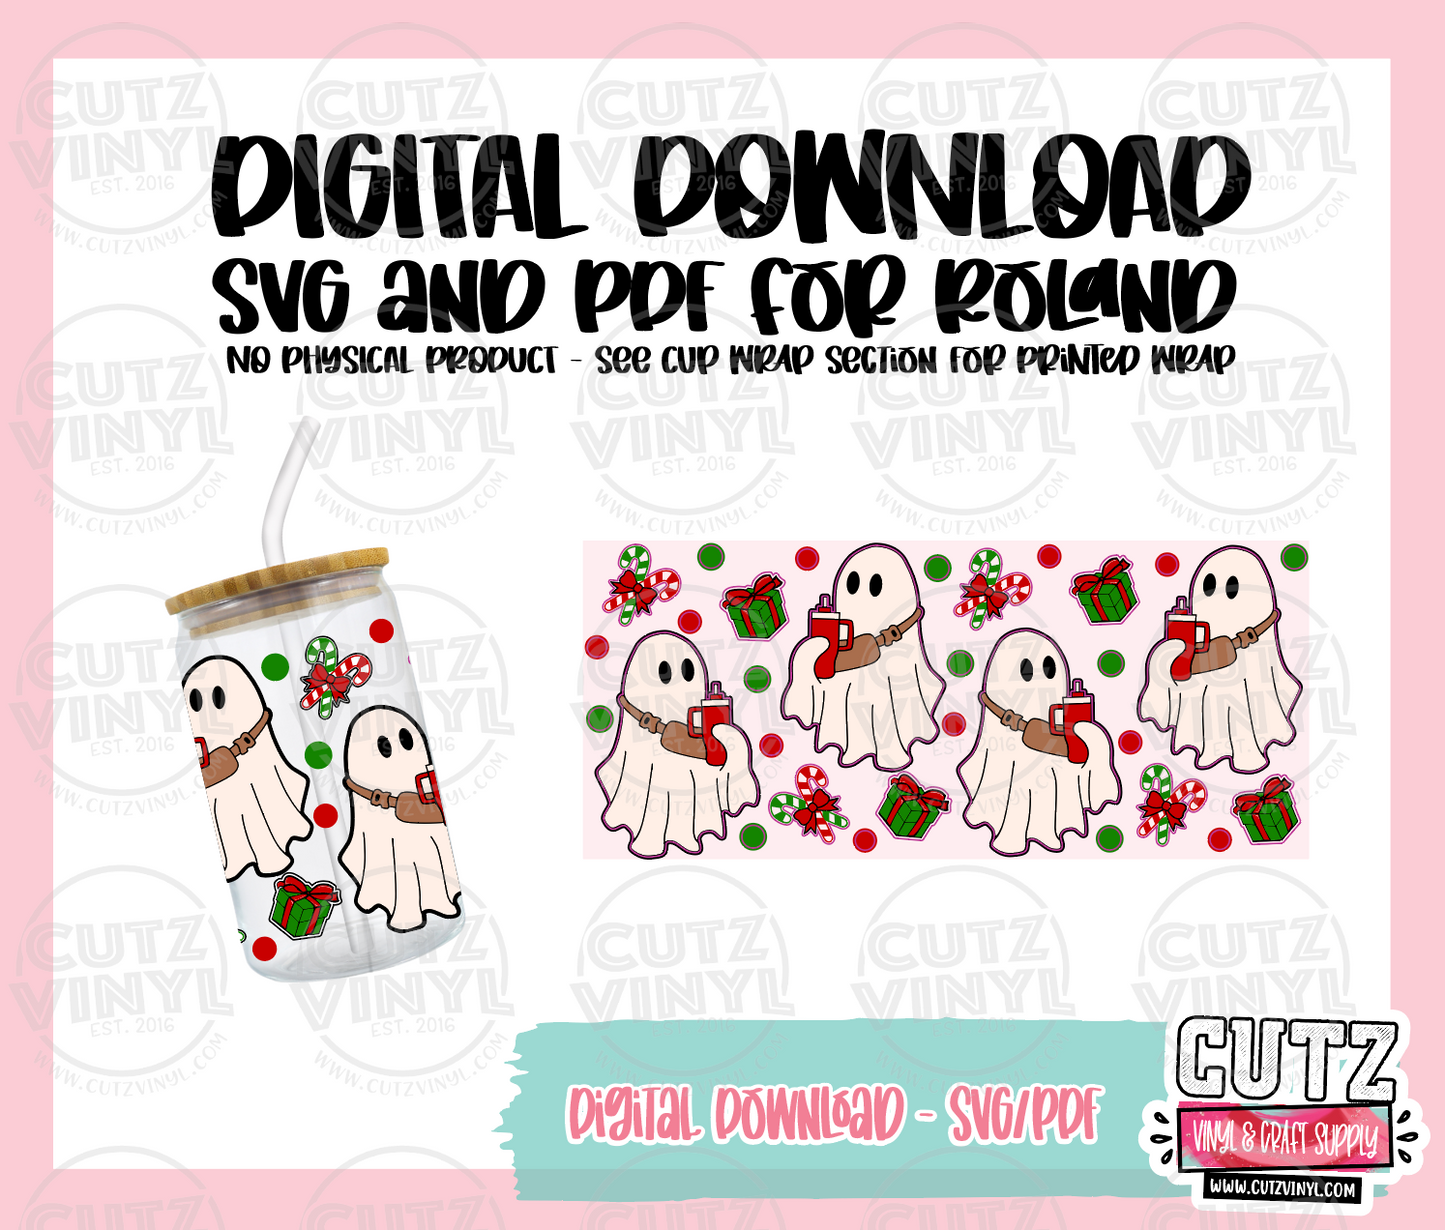 DIGITAL DOWNLOAD - Boo Jee Xmas Ghost Cup Wrap